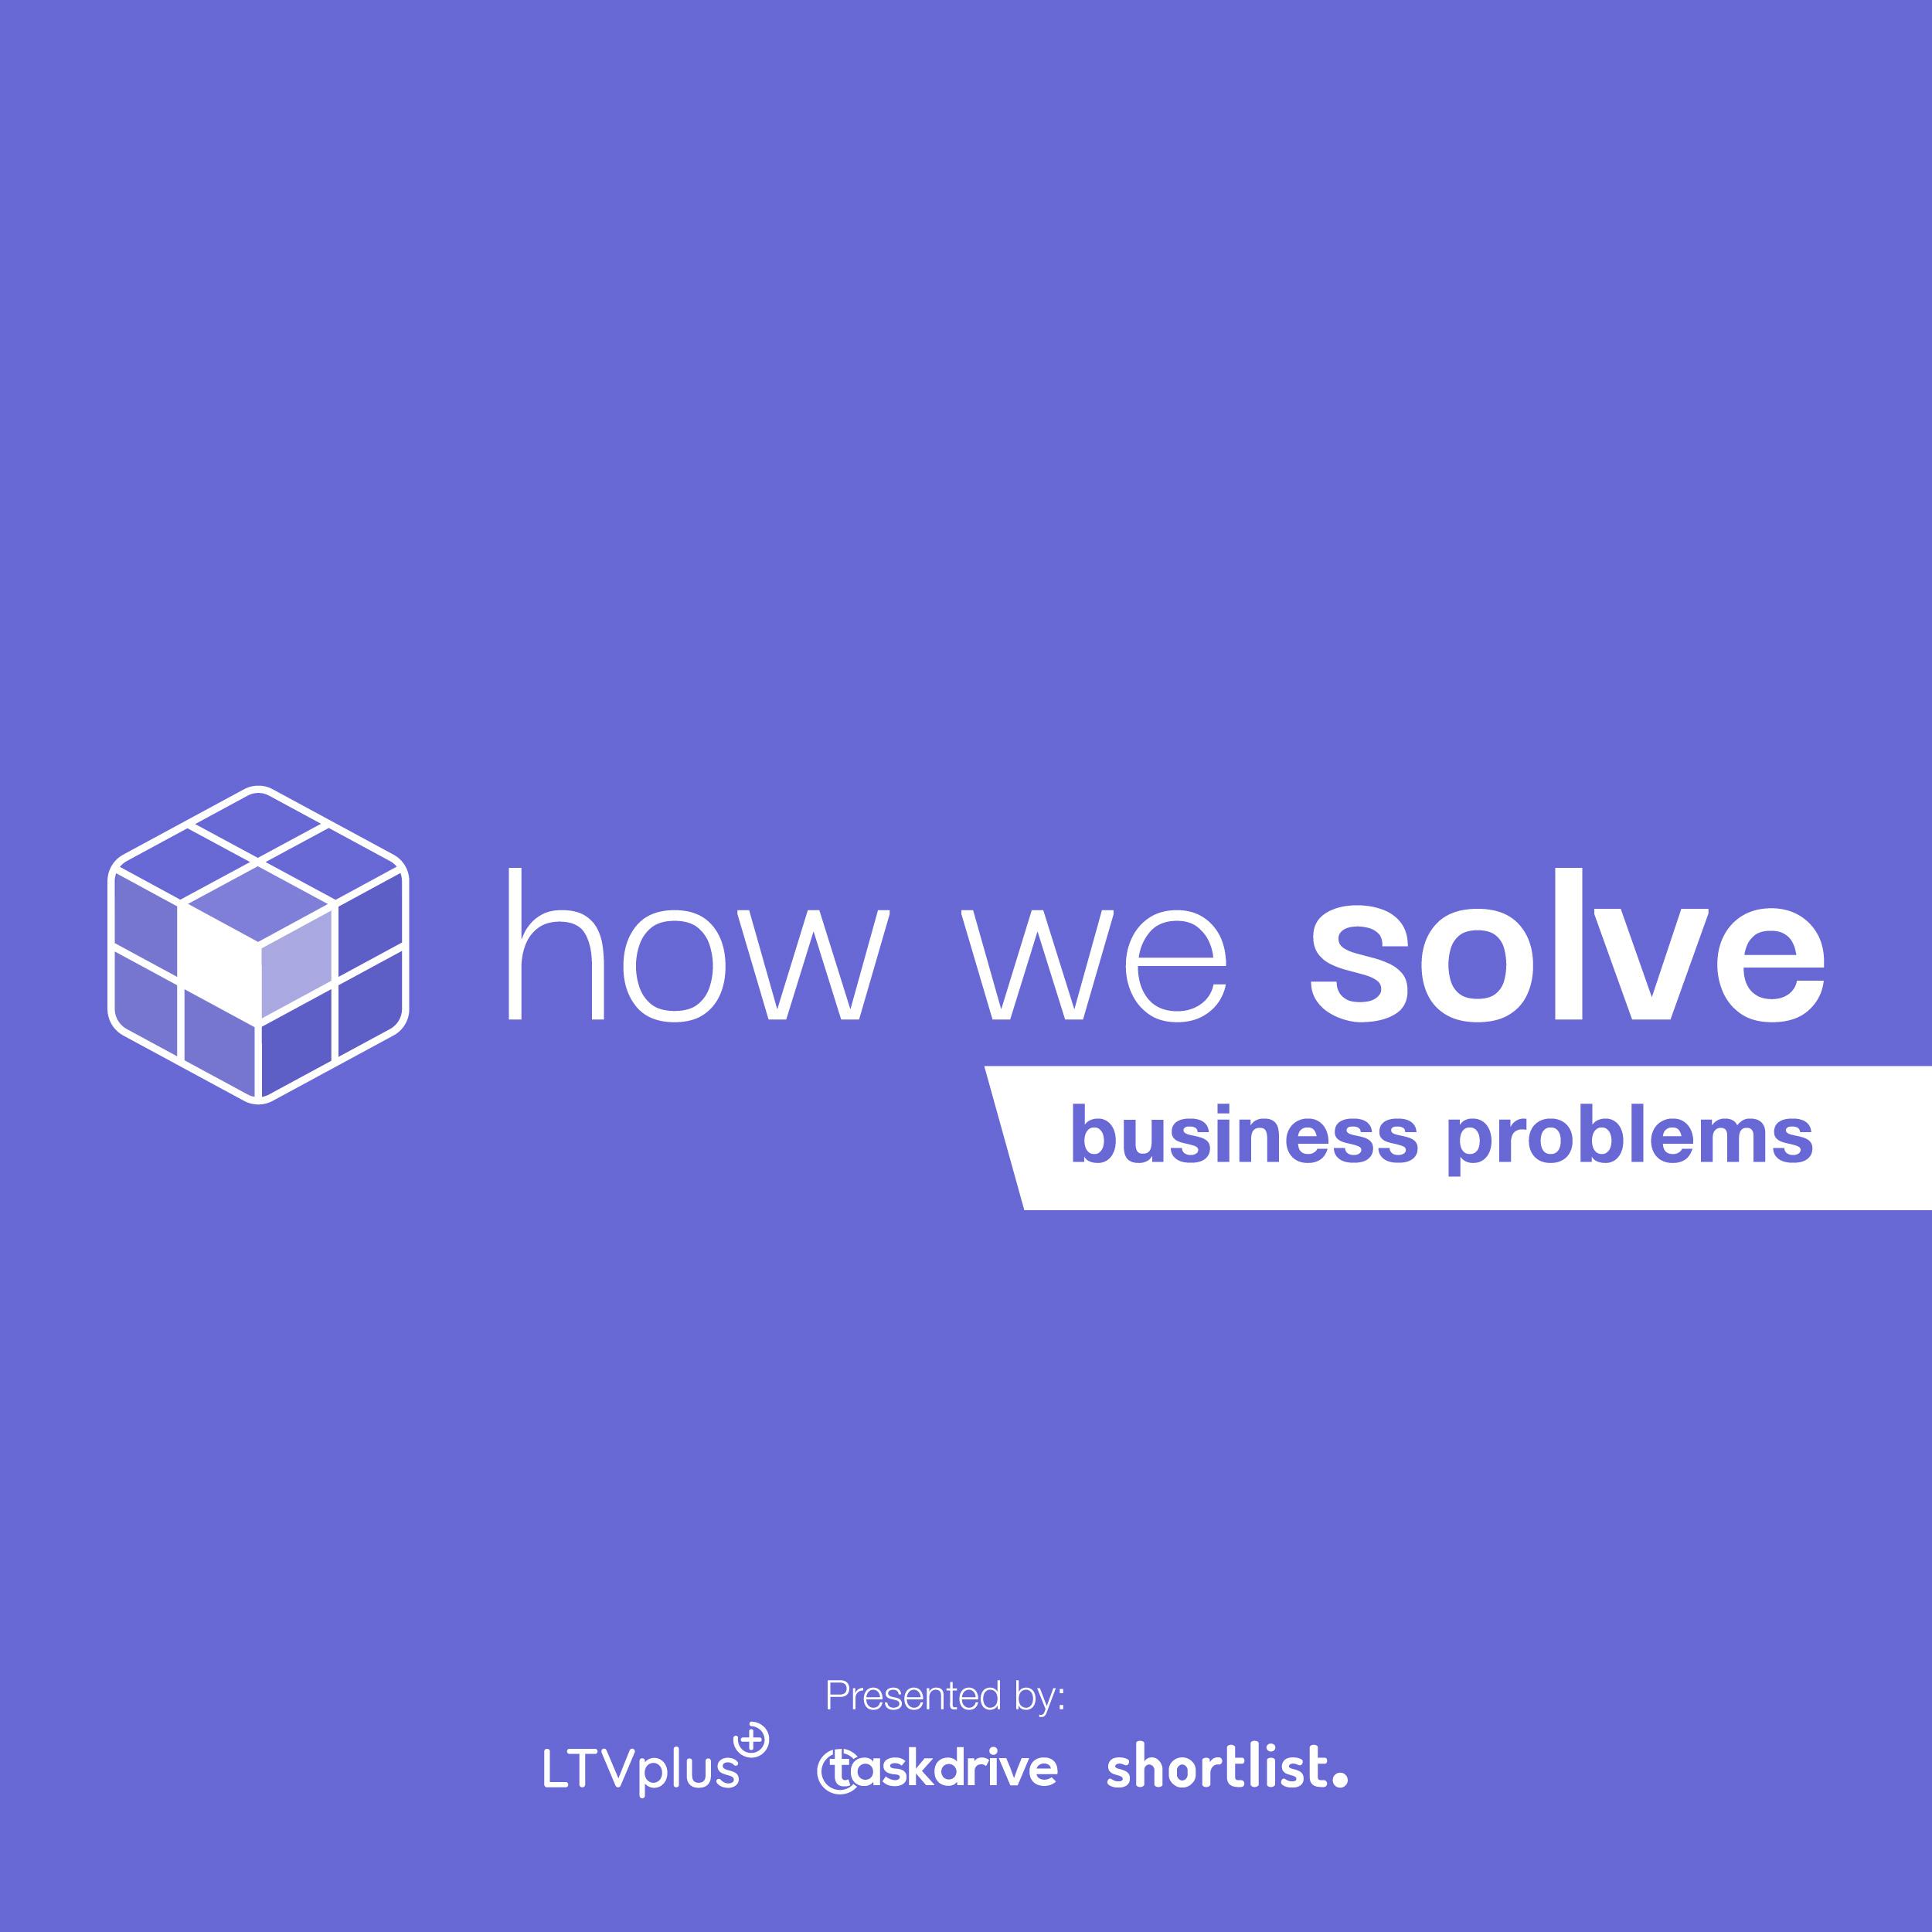 How We Solve